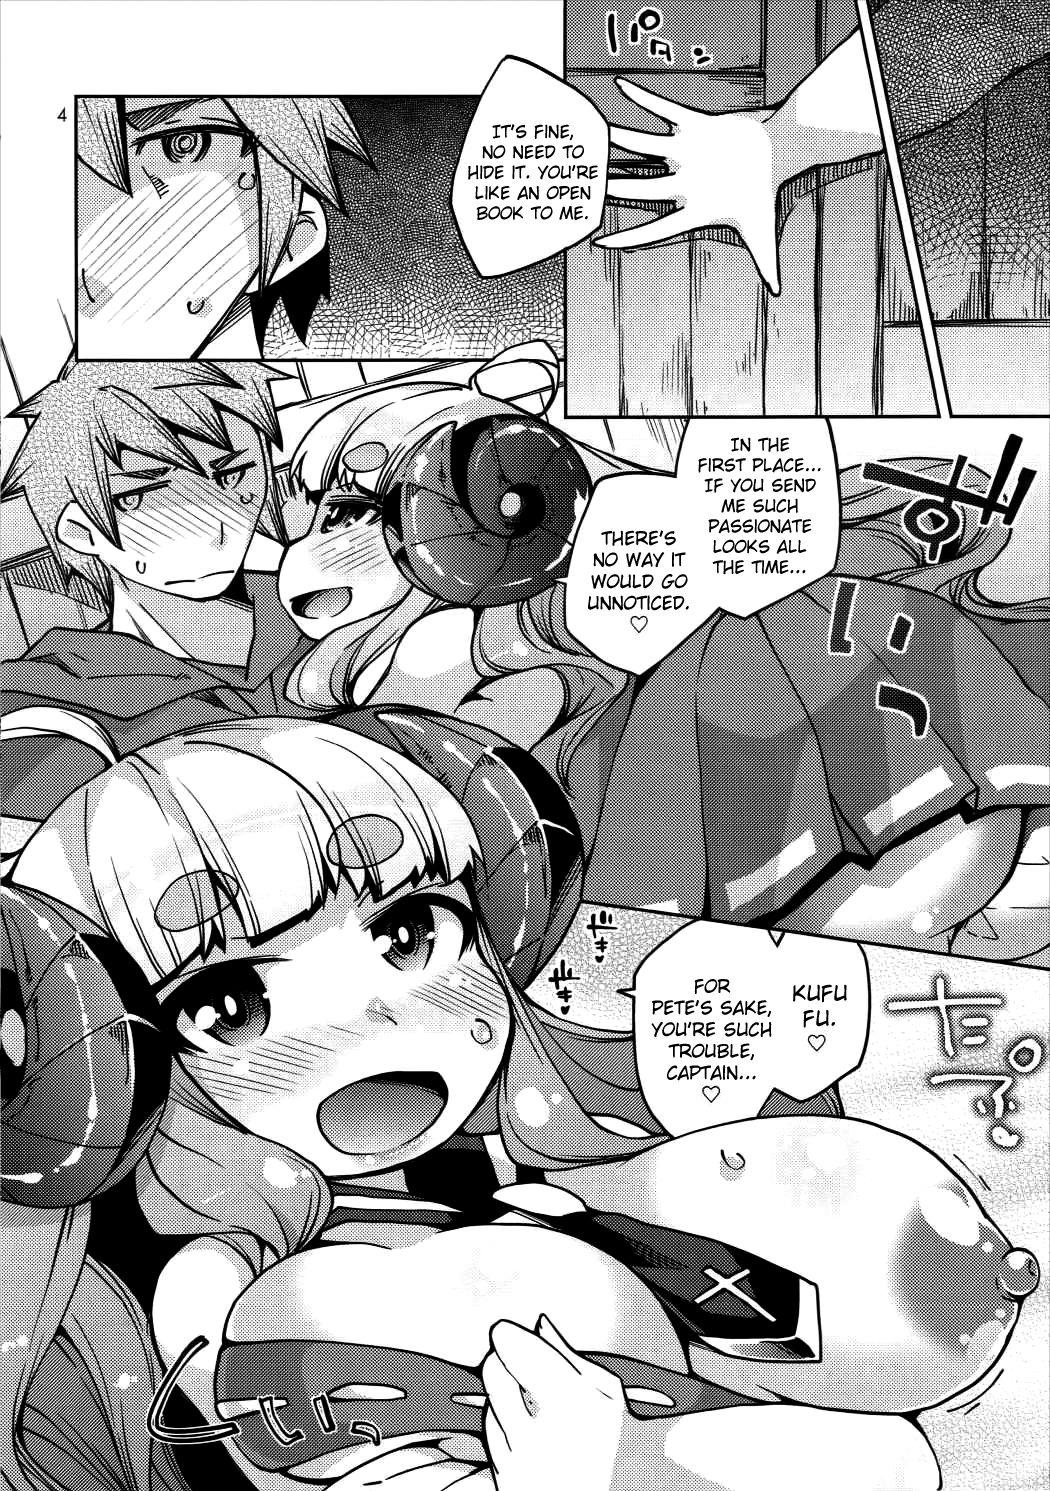 Flogging Sheep God and Naughty Captain - Granblue fantasy Colombiana - Page 3